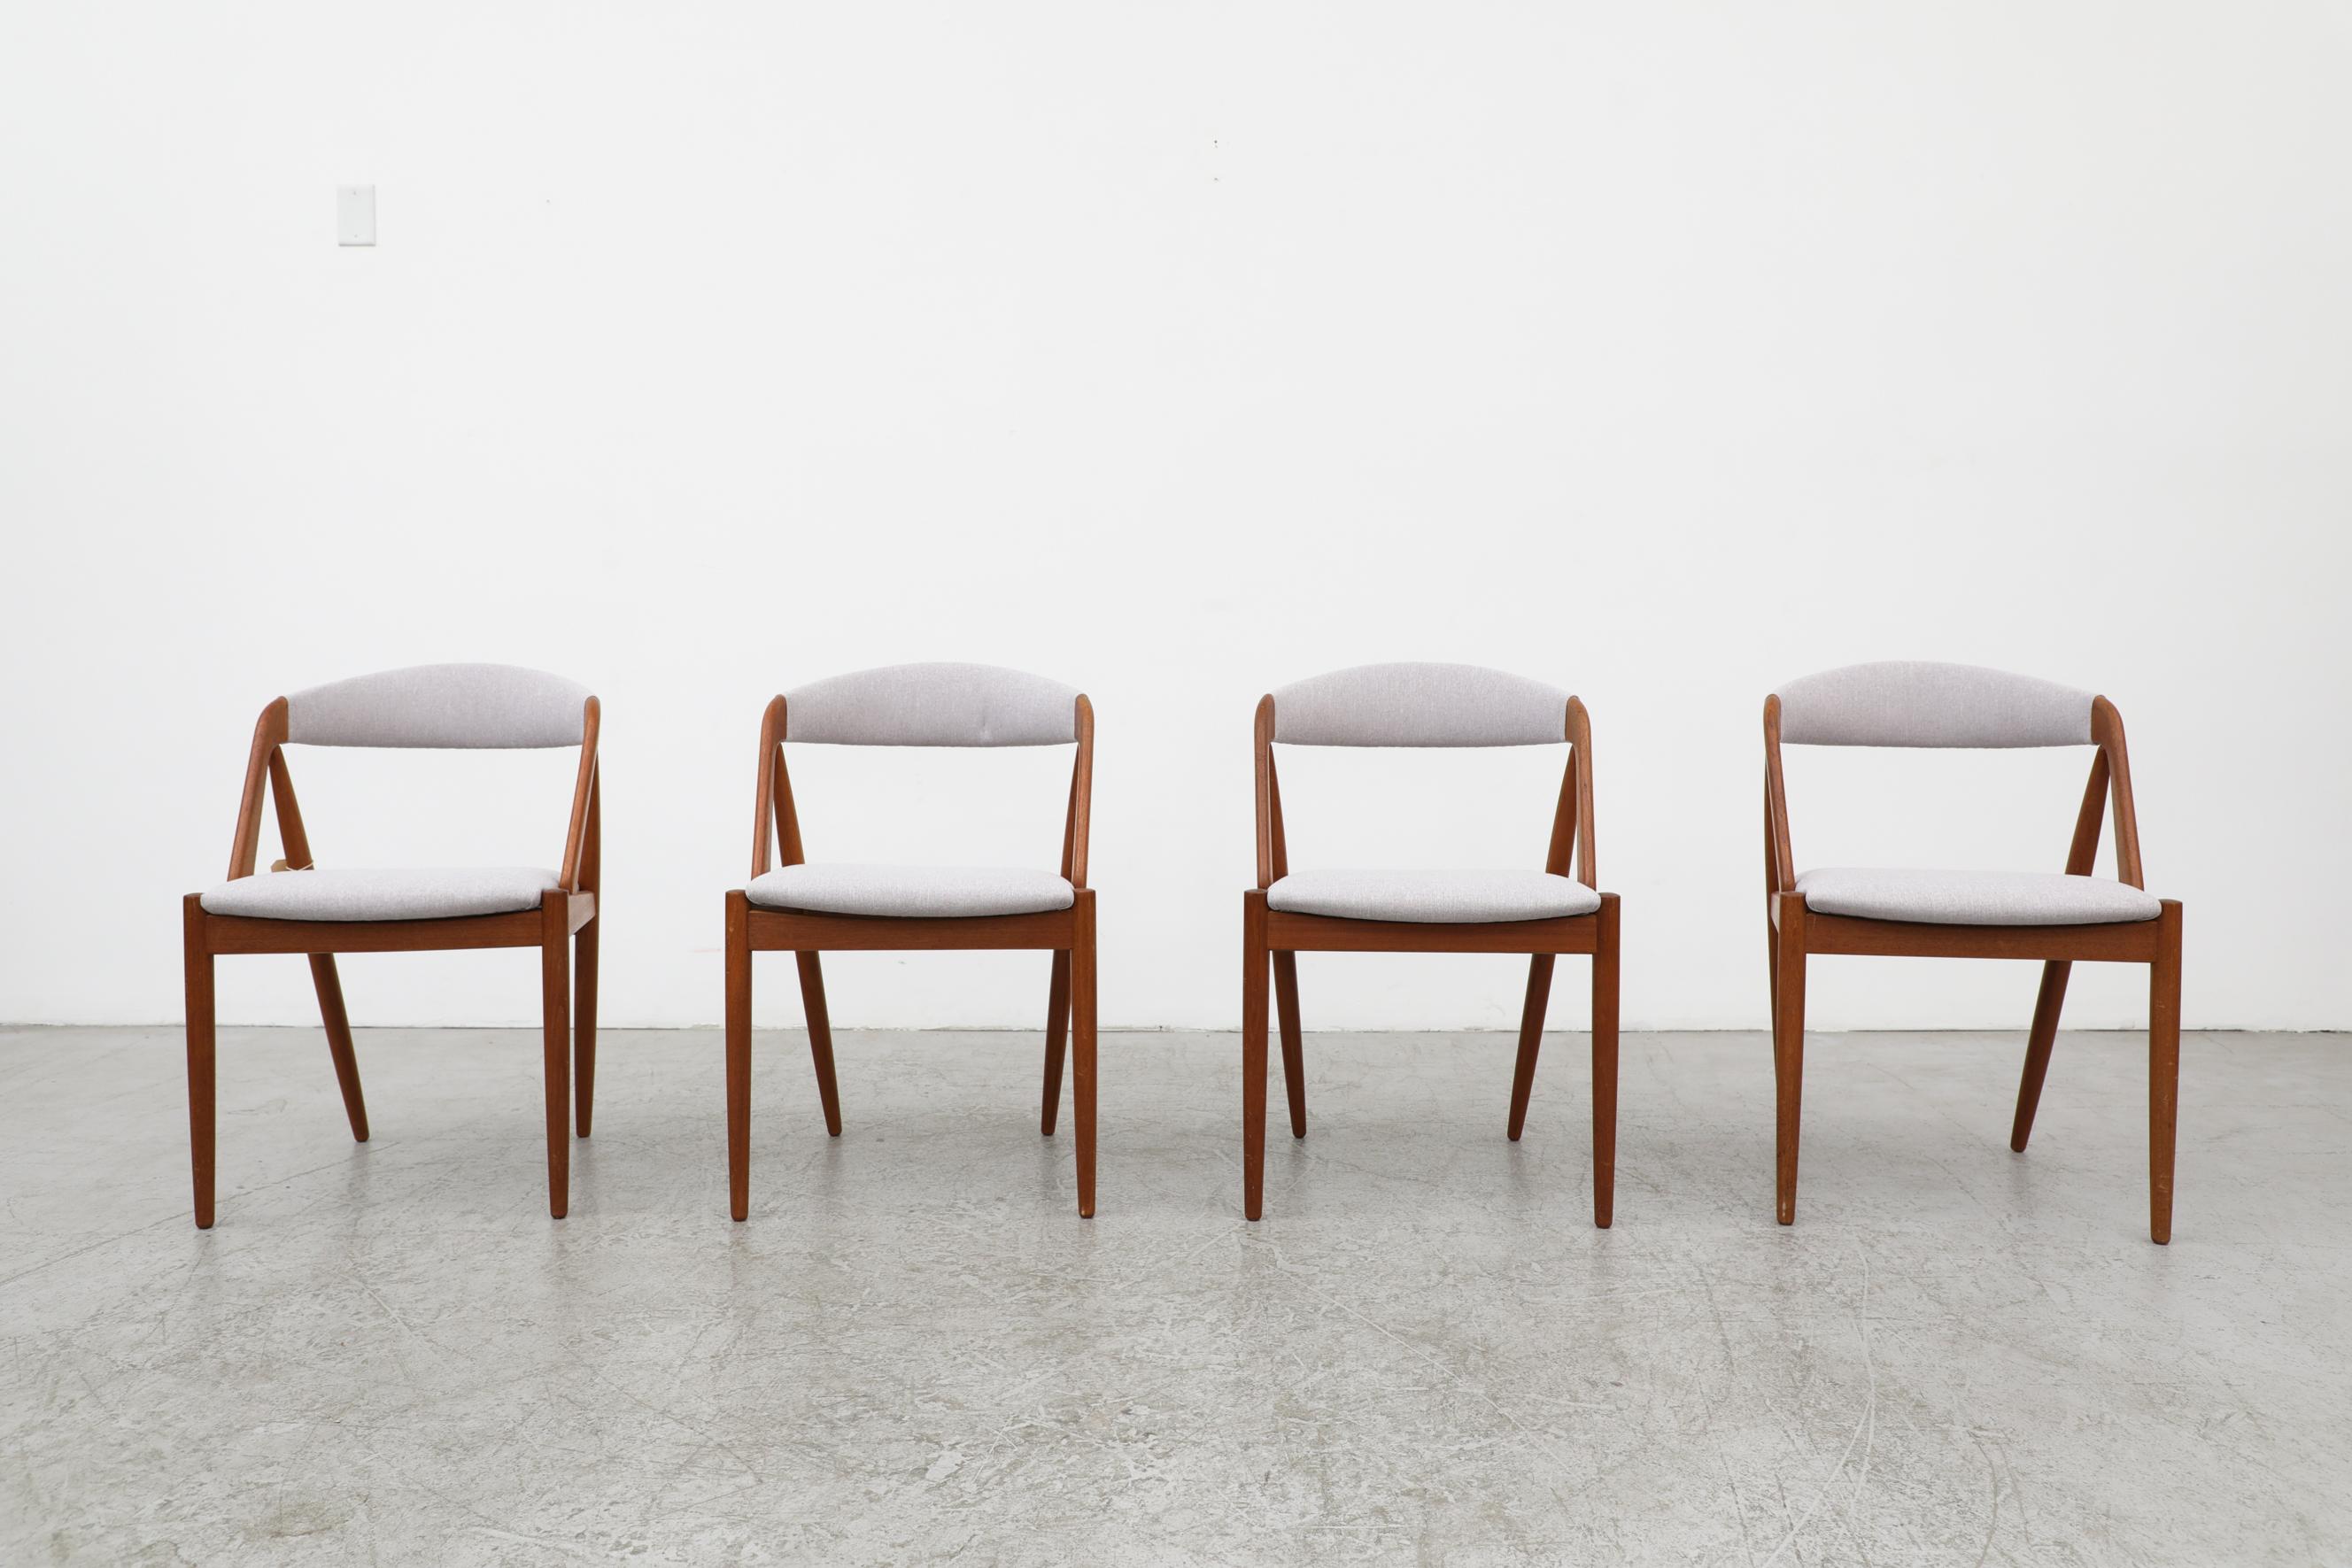 Set of 4 Kai Kristiansen 'Handy' dining chairs with lilac upholstery. Formerly known as the ‘NV31’ chair. A versatile designer, Kristiansen was at ease creating a variety of furniture. His designs are characterized by simple shapes and an ideal